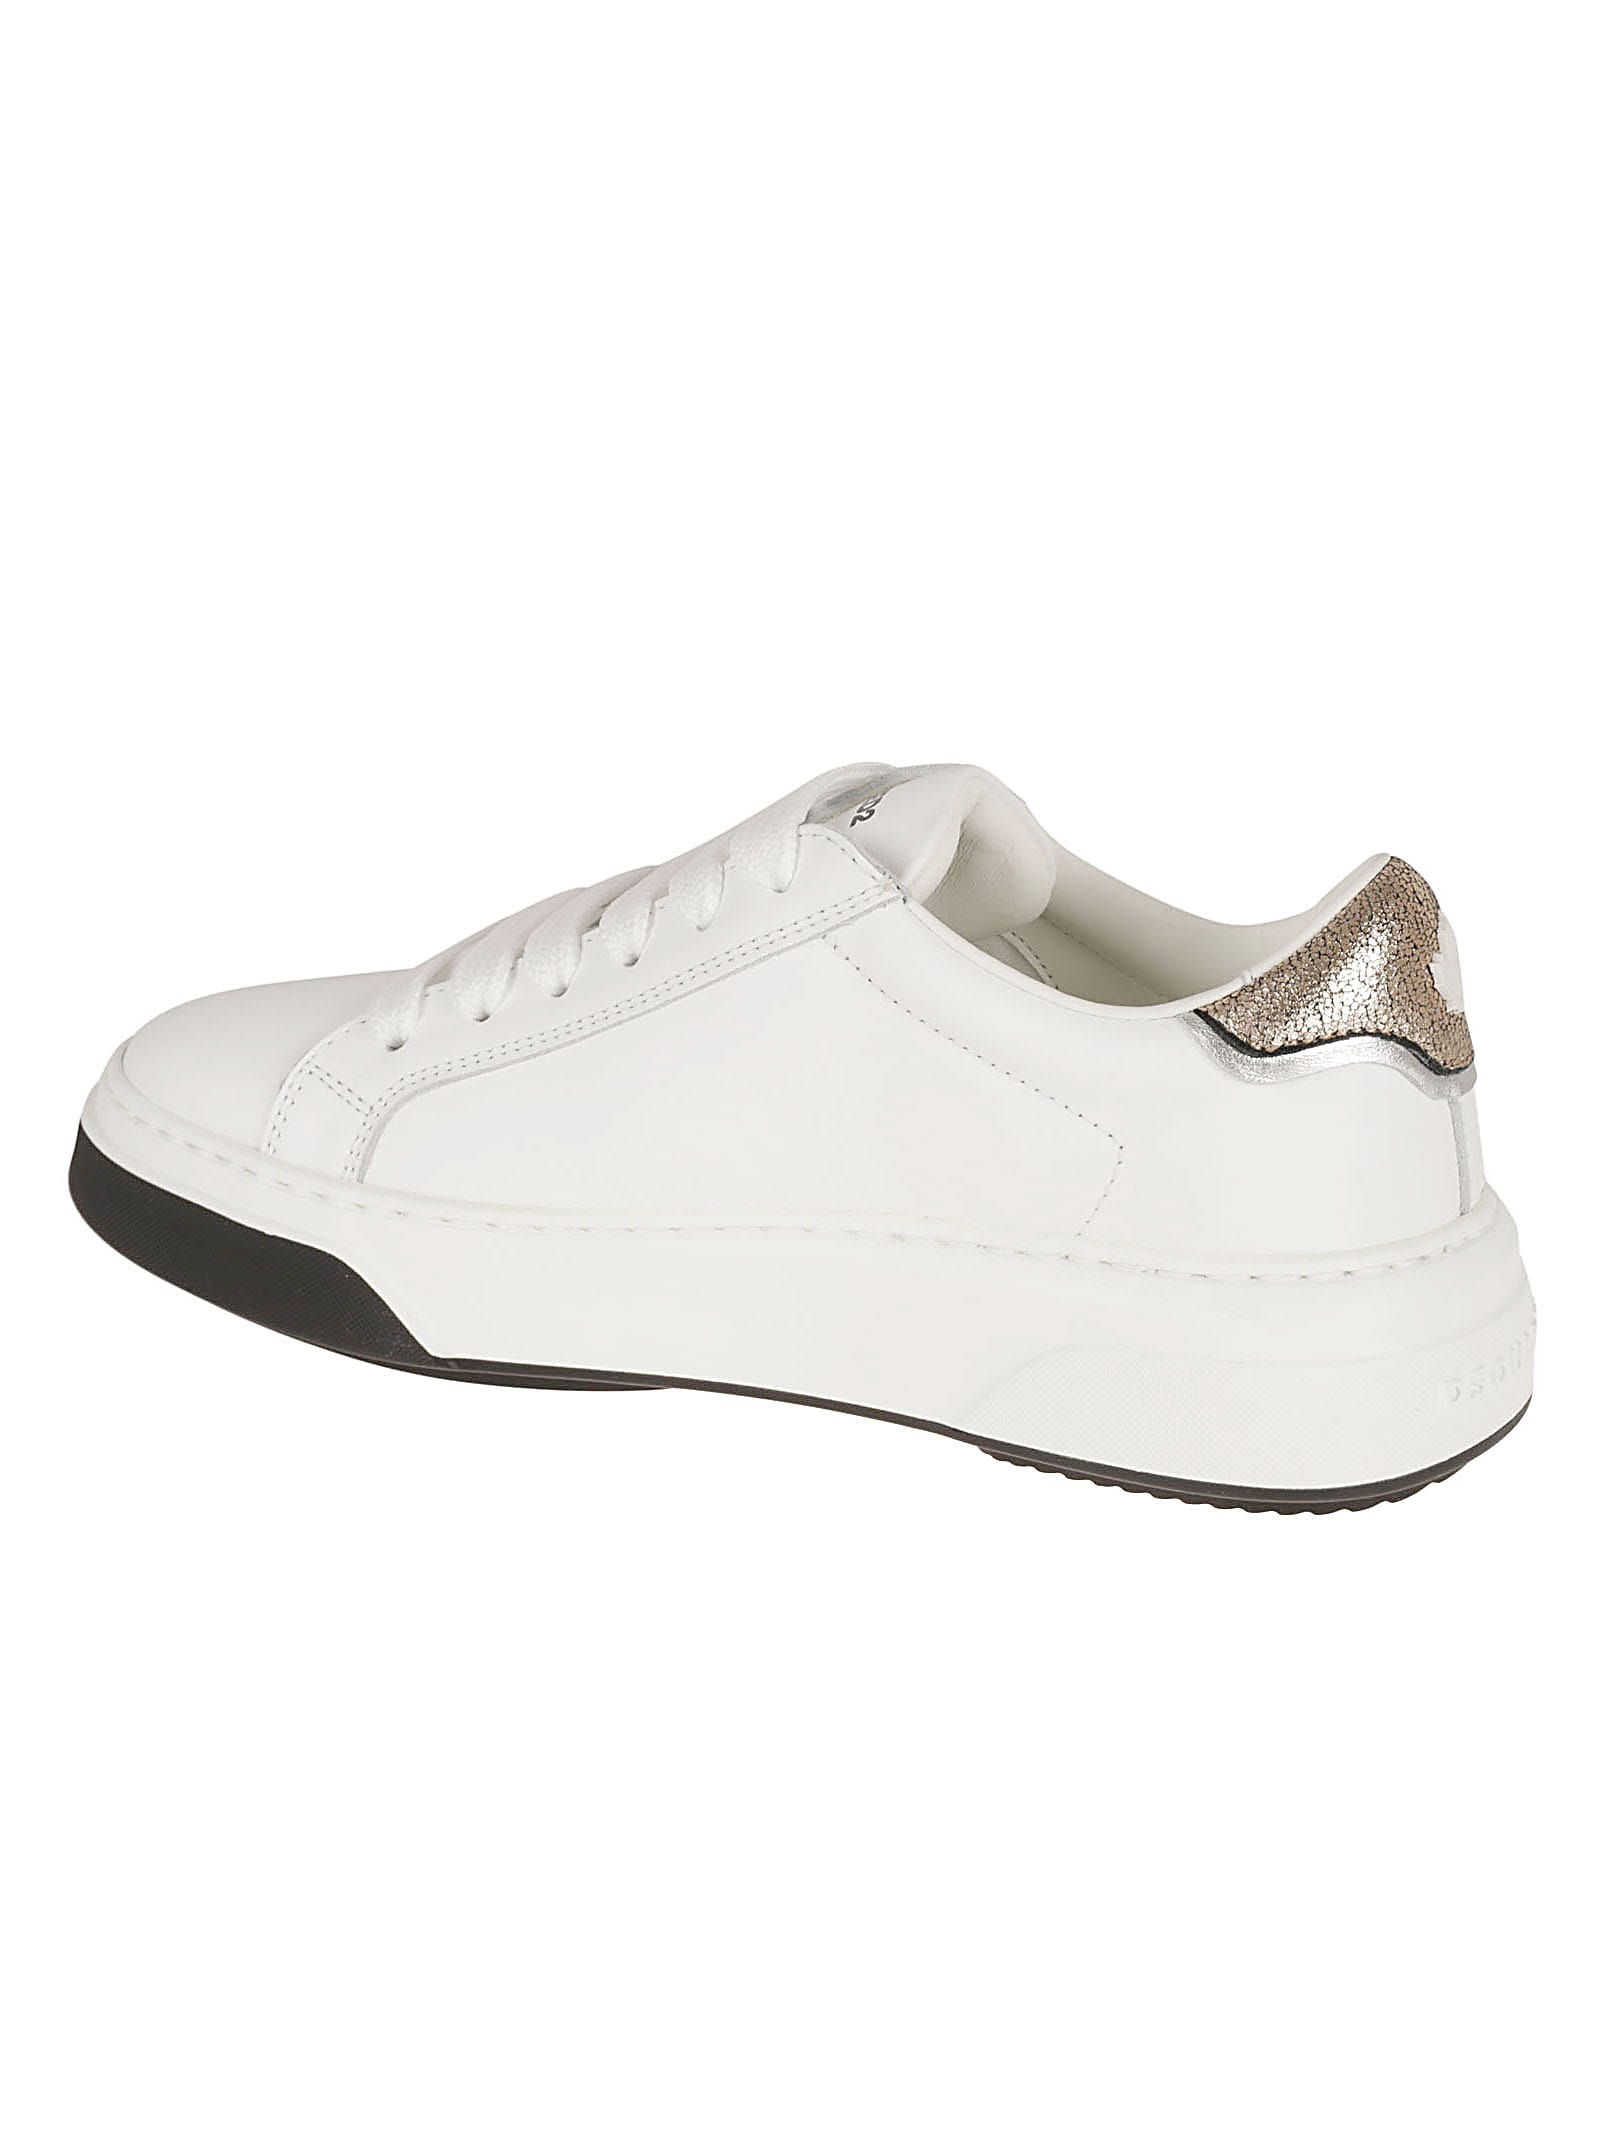 Shop Dsquared2 Bumper Sneakers In White / Gold